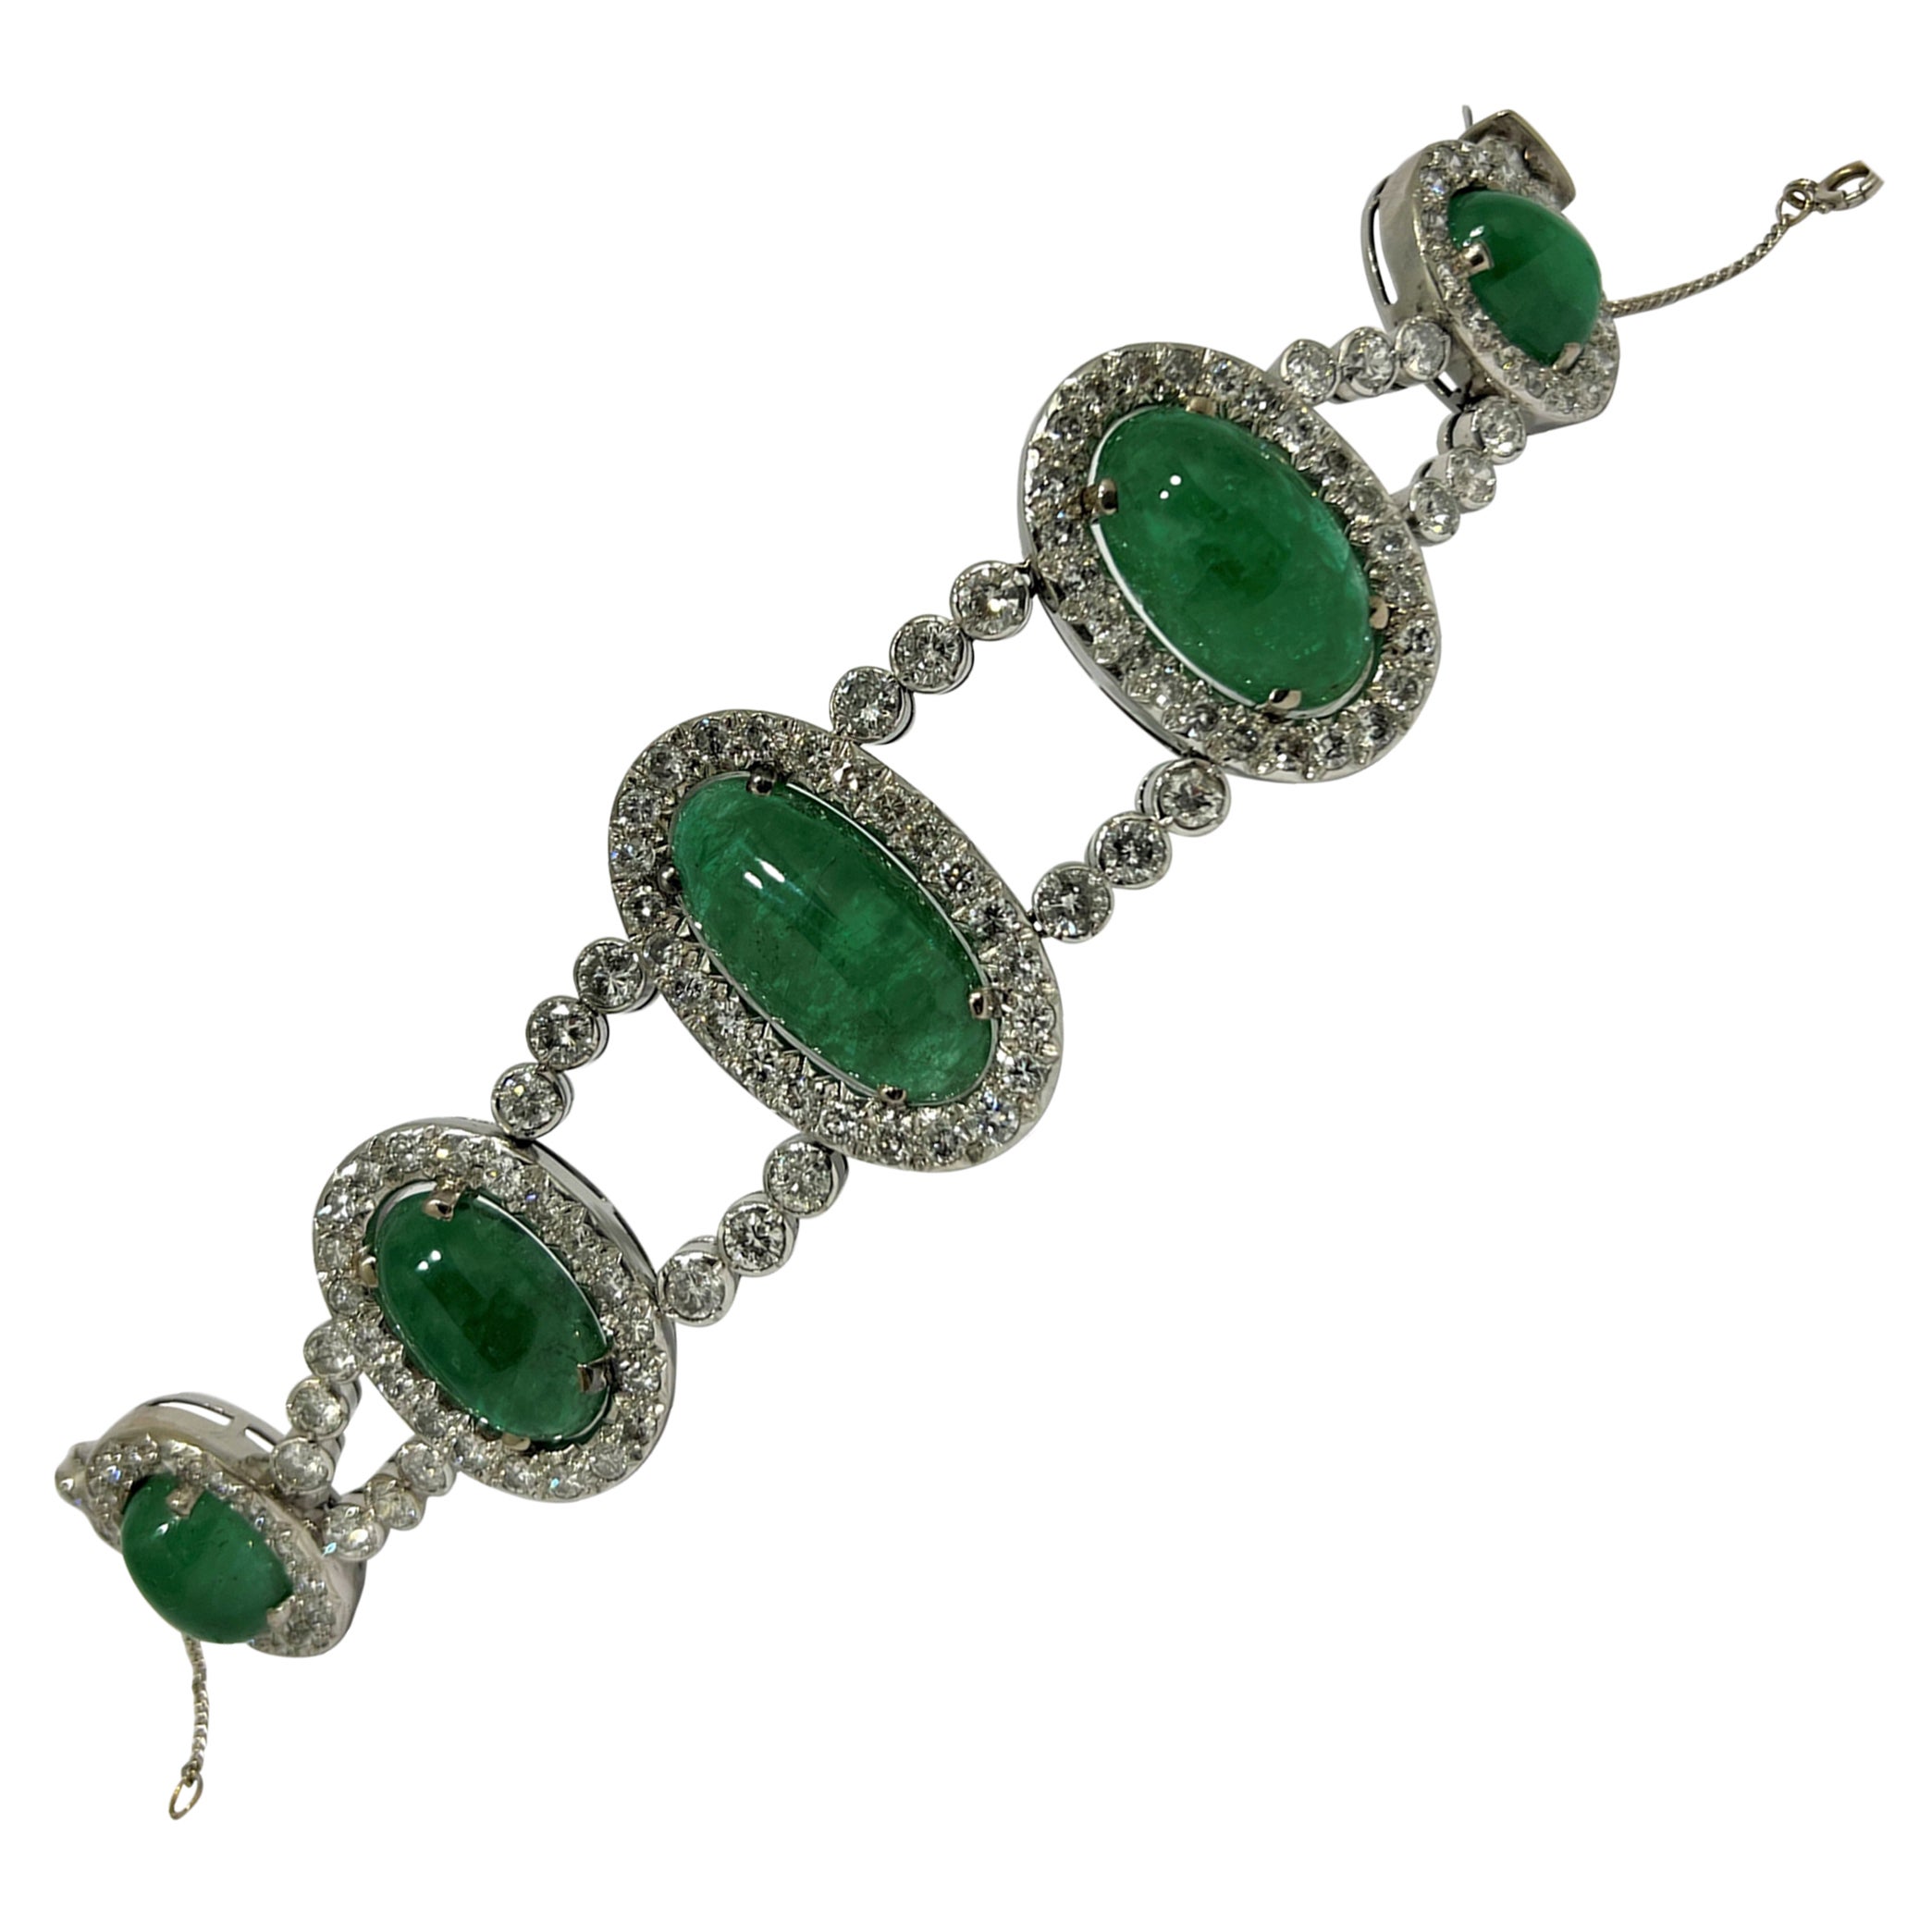 60's Colombian Cabouchon 70ct Emerald Bracelet in 18k Gold and Diamonds